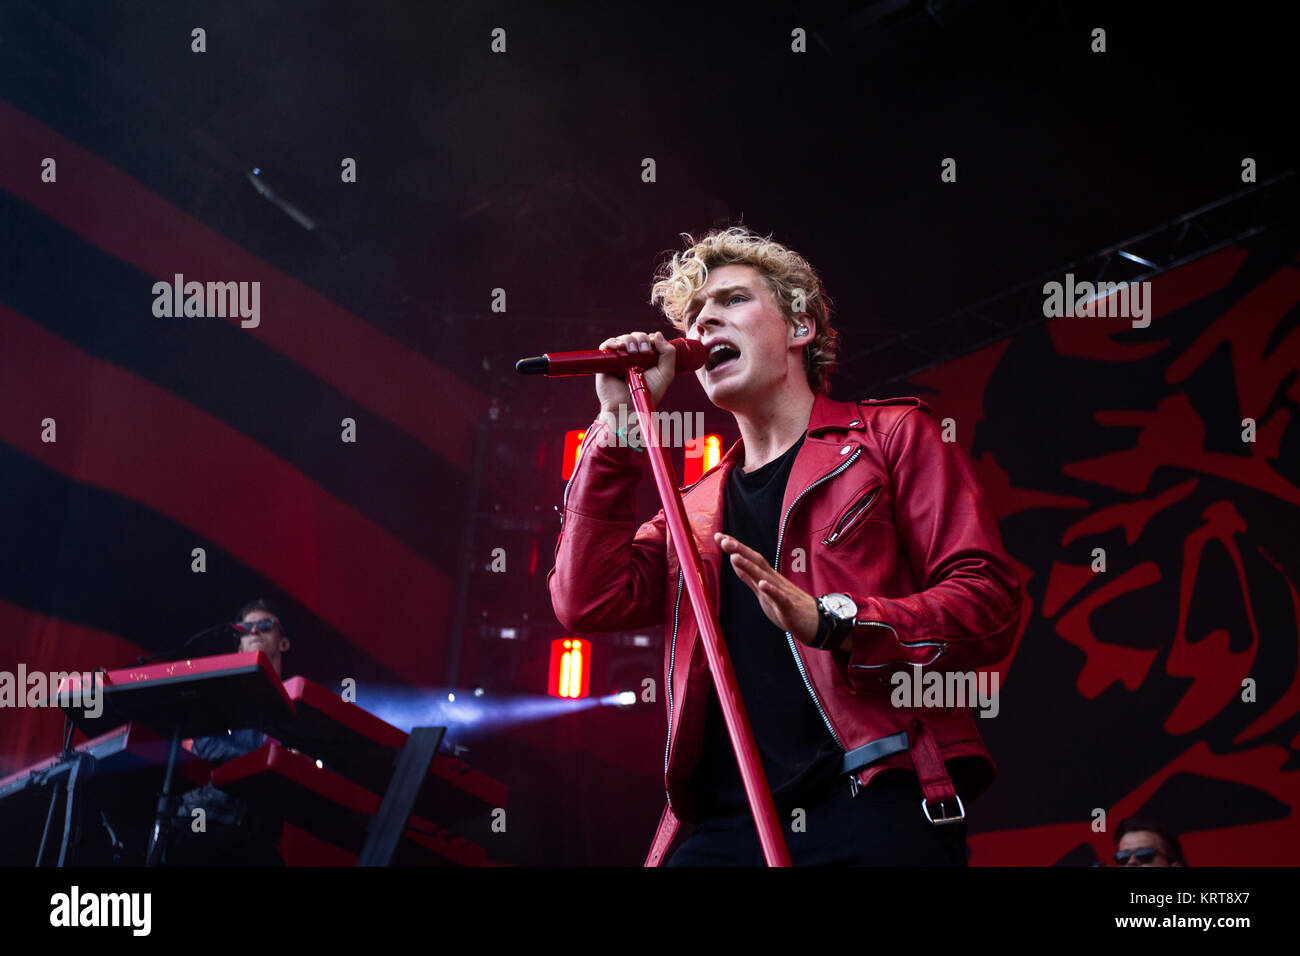 The Danish pop singer, songwriter and teenage idol Christopher Lund Nissen  is best known as just Christopher and is here pictured live on stage at the Danish  music festival Grøn Koncert 2015